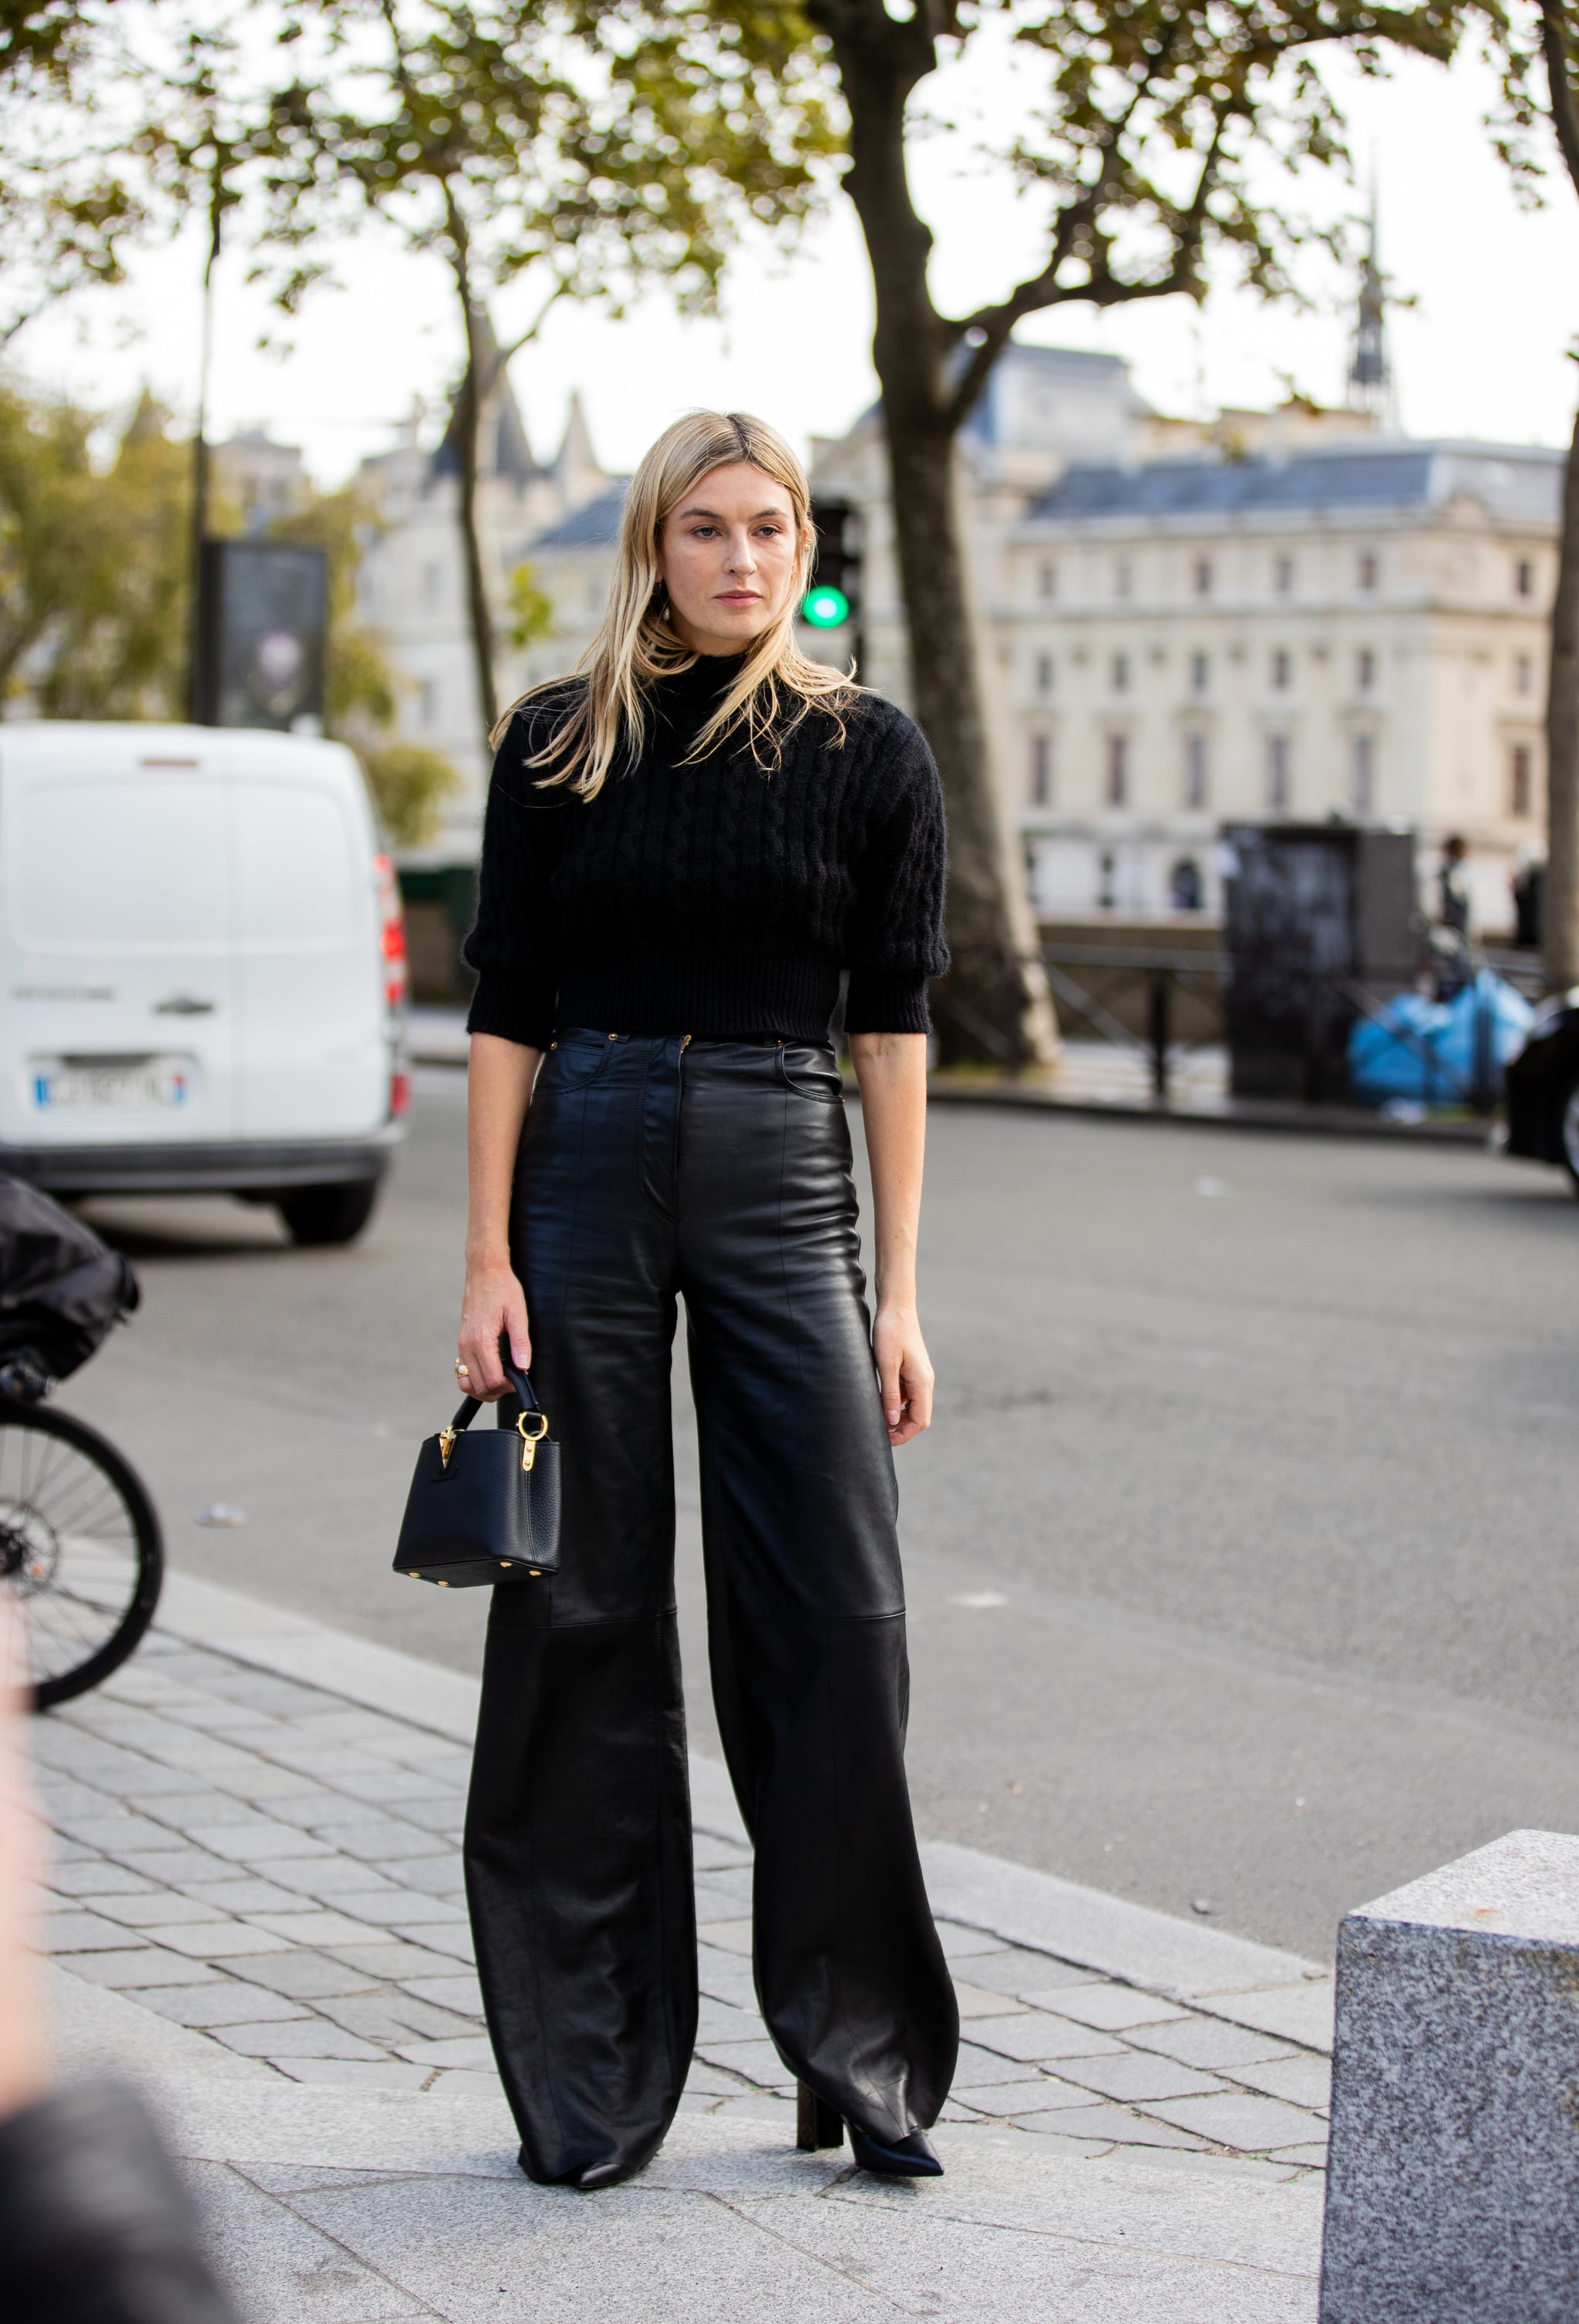 The Best Street Style at Paris Fashion Week AW15